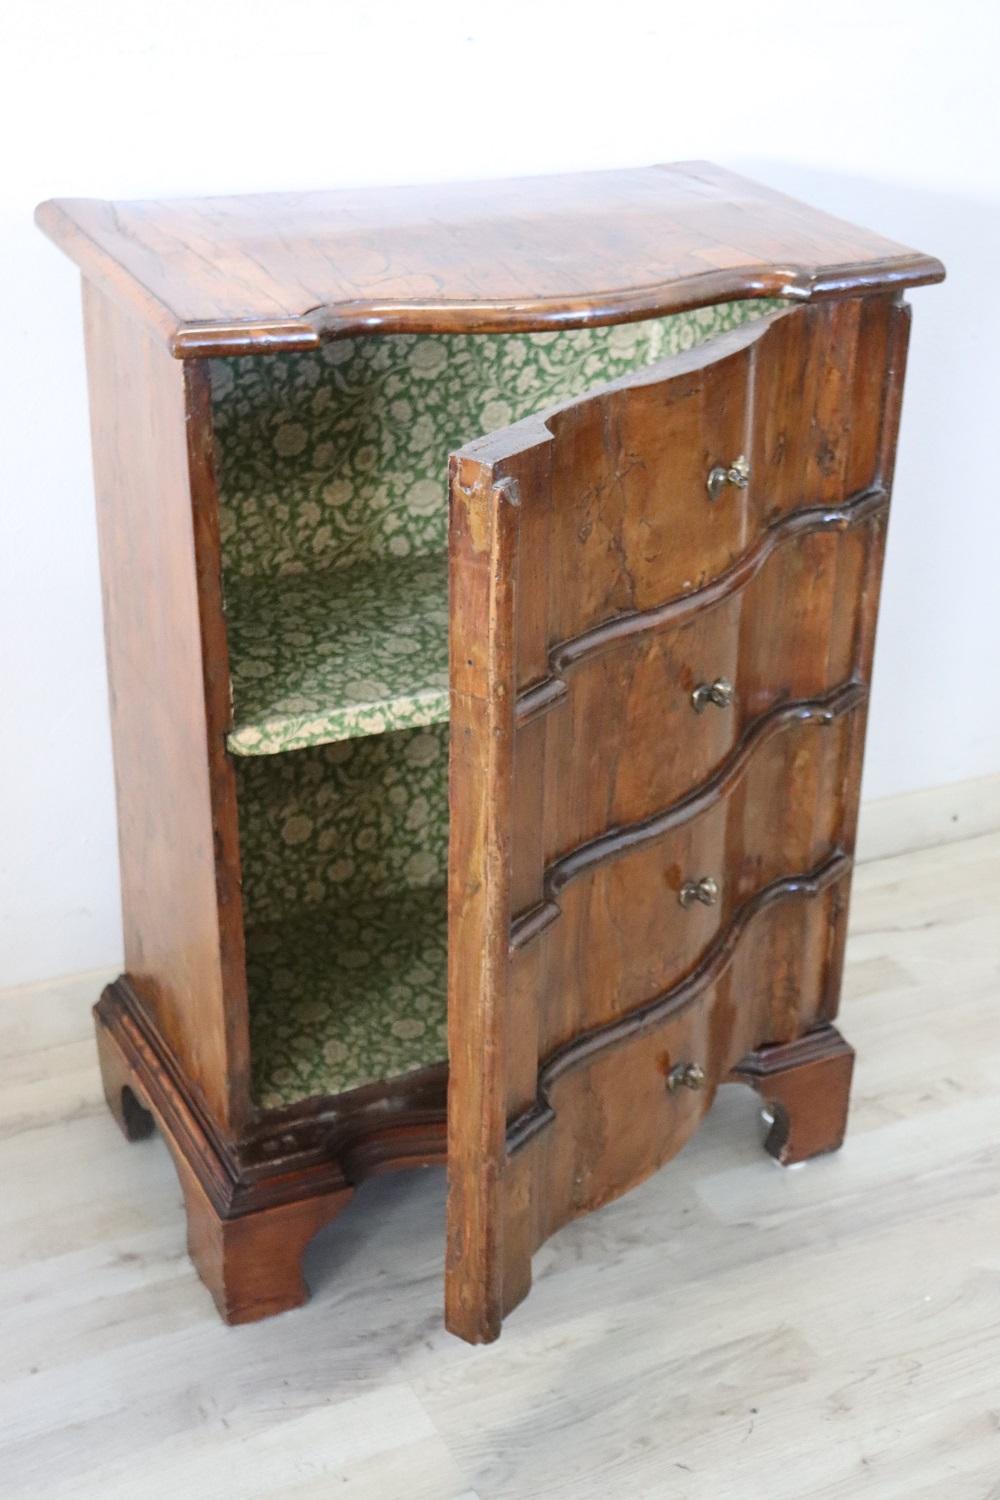 Rare and fine quality Italian Venetian 1680 antique nightstand in walnut veneer. The veneering of the wood is very thick as was used in ancient times. Particular wavy shape on the front typical of Venetian furniture. It might appear to have drawers